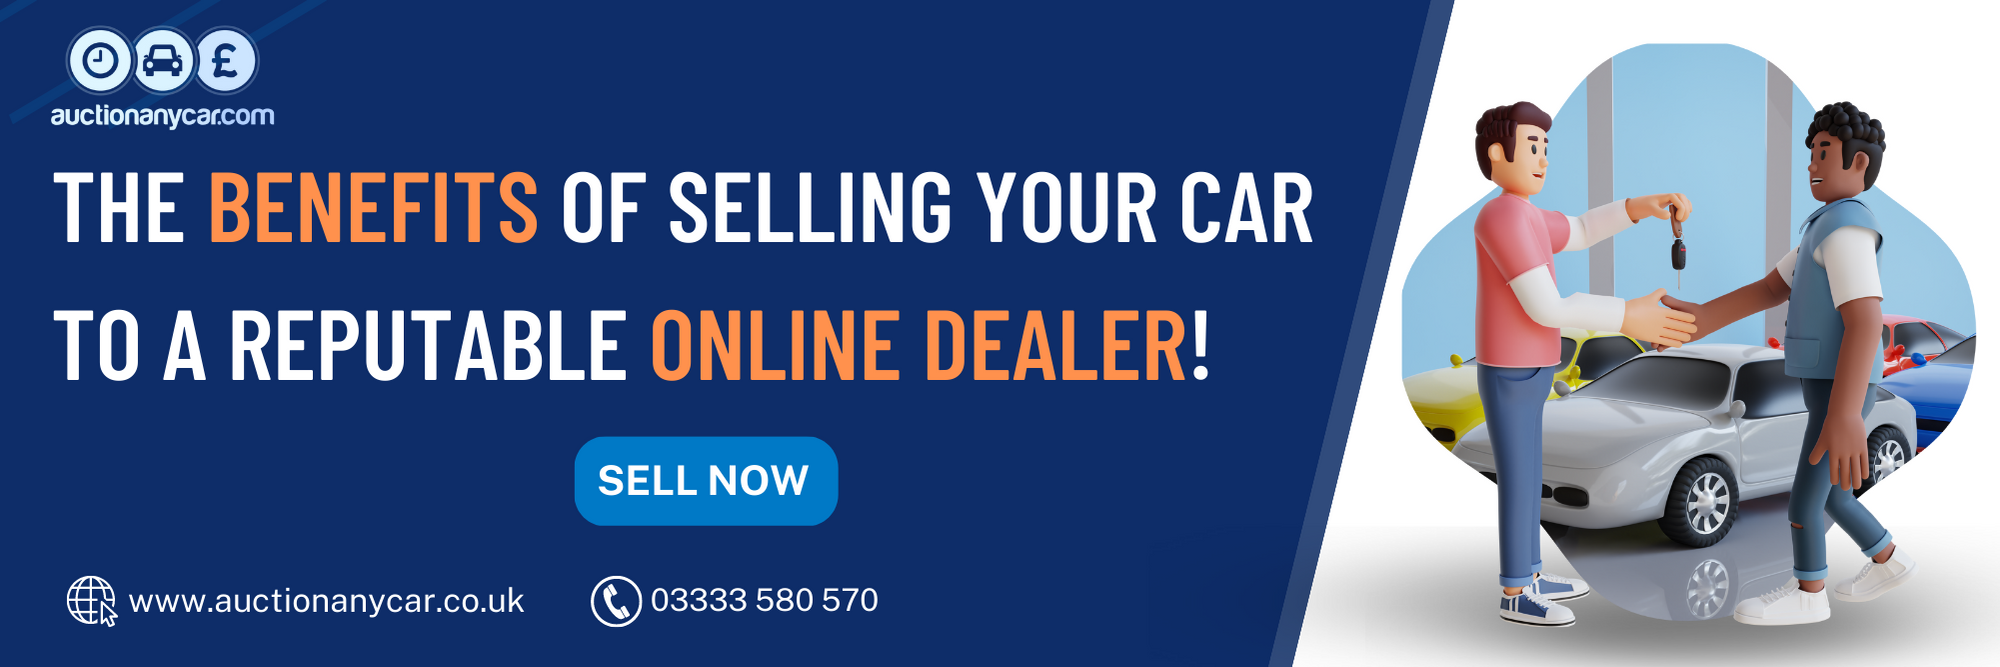 The Benefits of Selling Your Car to a Reputable Online Dealer